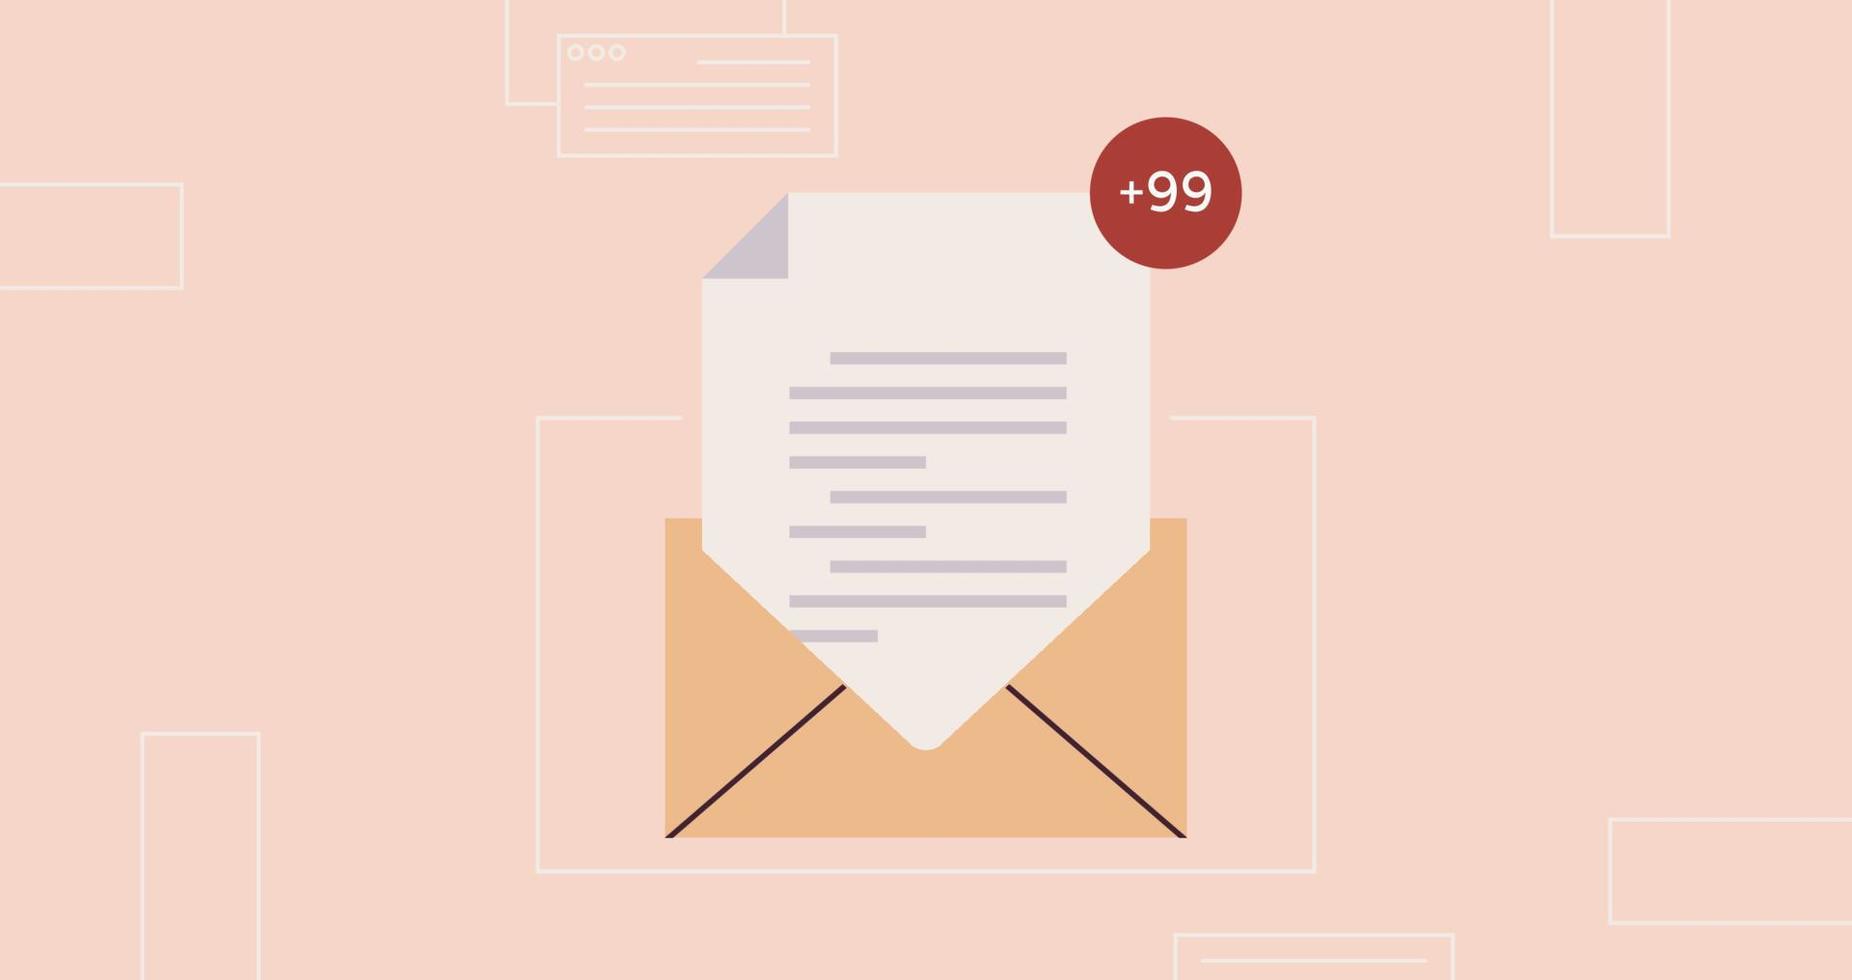 Sending or receiving letters email inbox message notification and new unread mail business communication flat vector illustration.